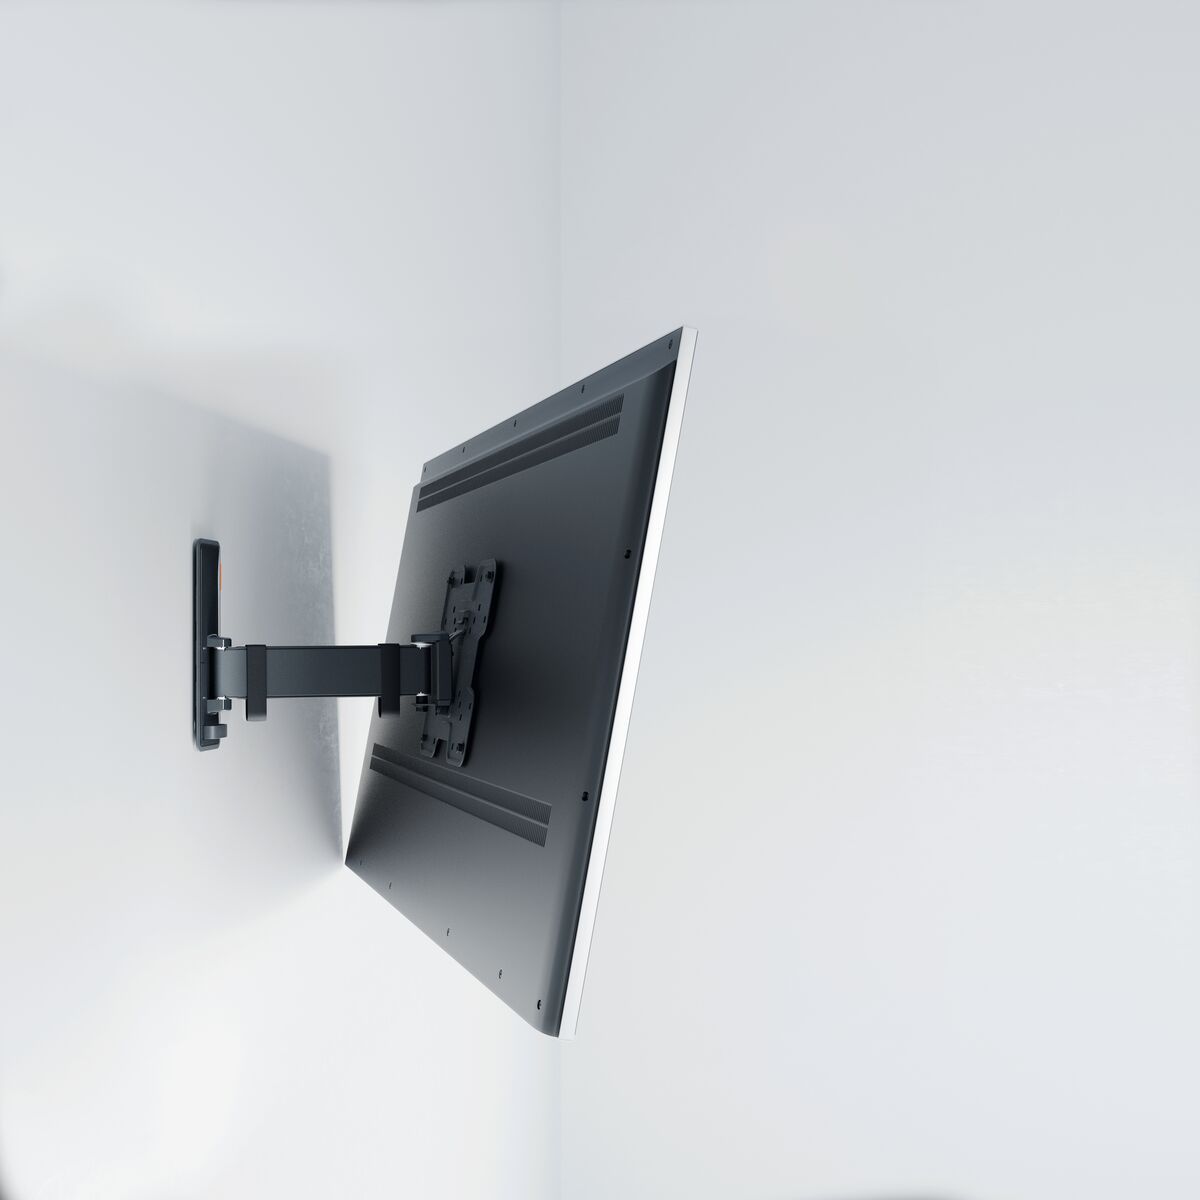 Vogel's TVM 3225 Full-Motion TV Wall Mount - Suitable for 19 up to 43 inch TVs - Up to 120° swivel - Tilt up to 20° - Application